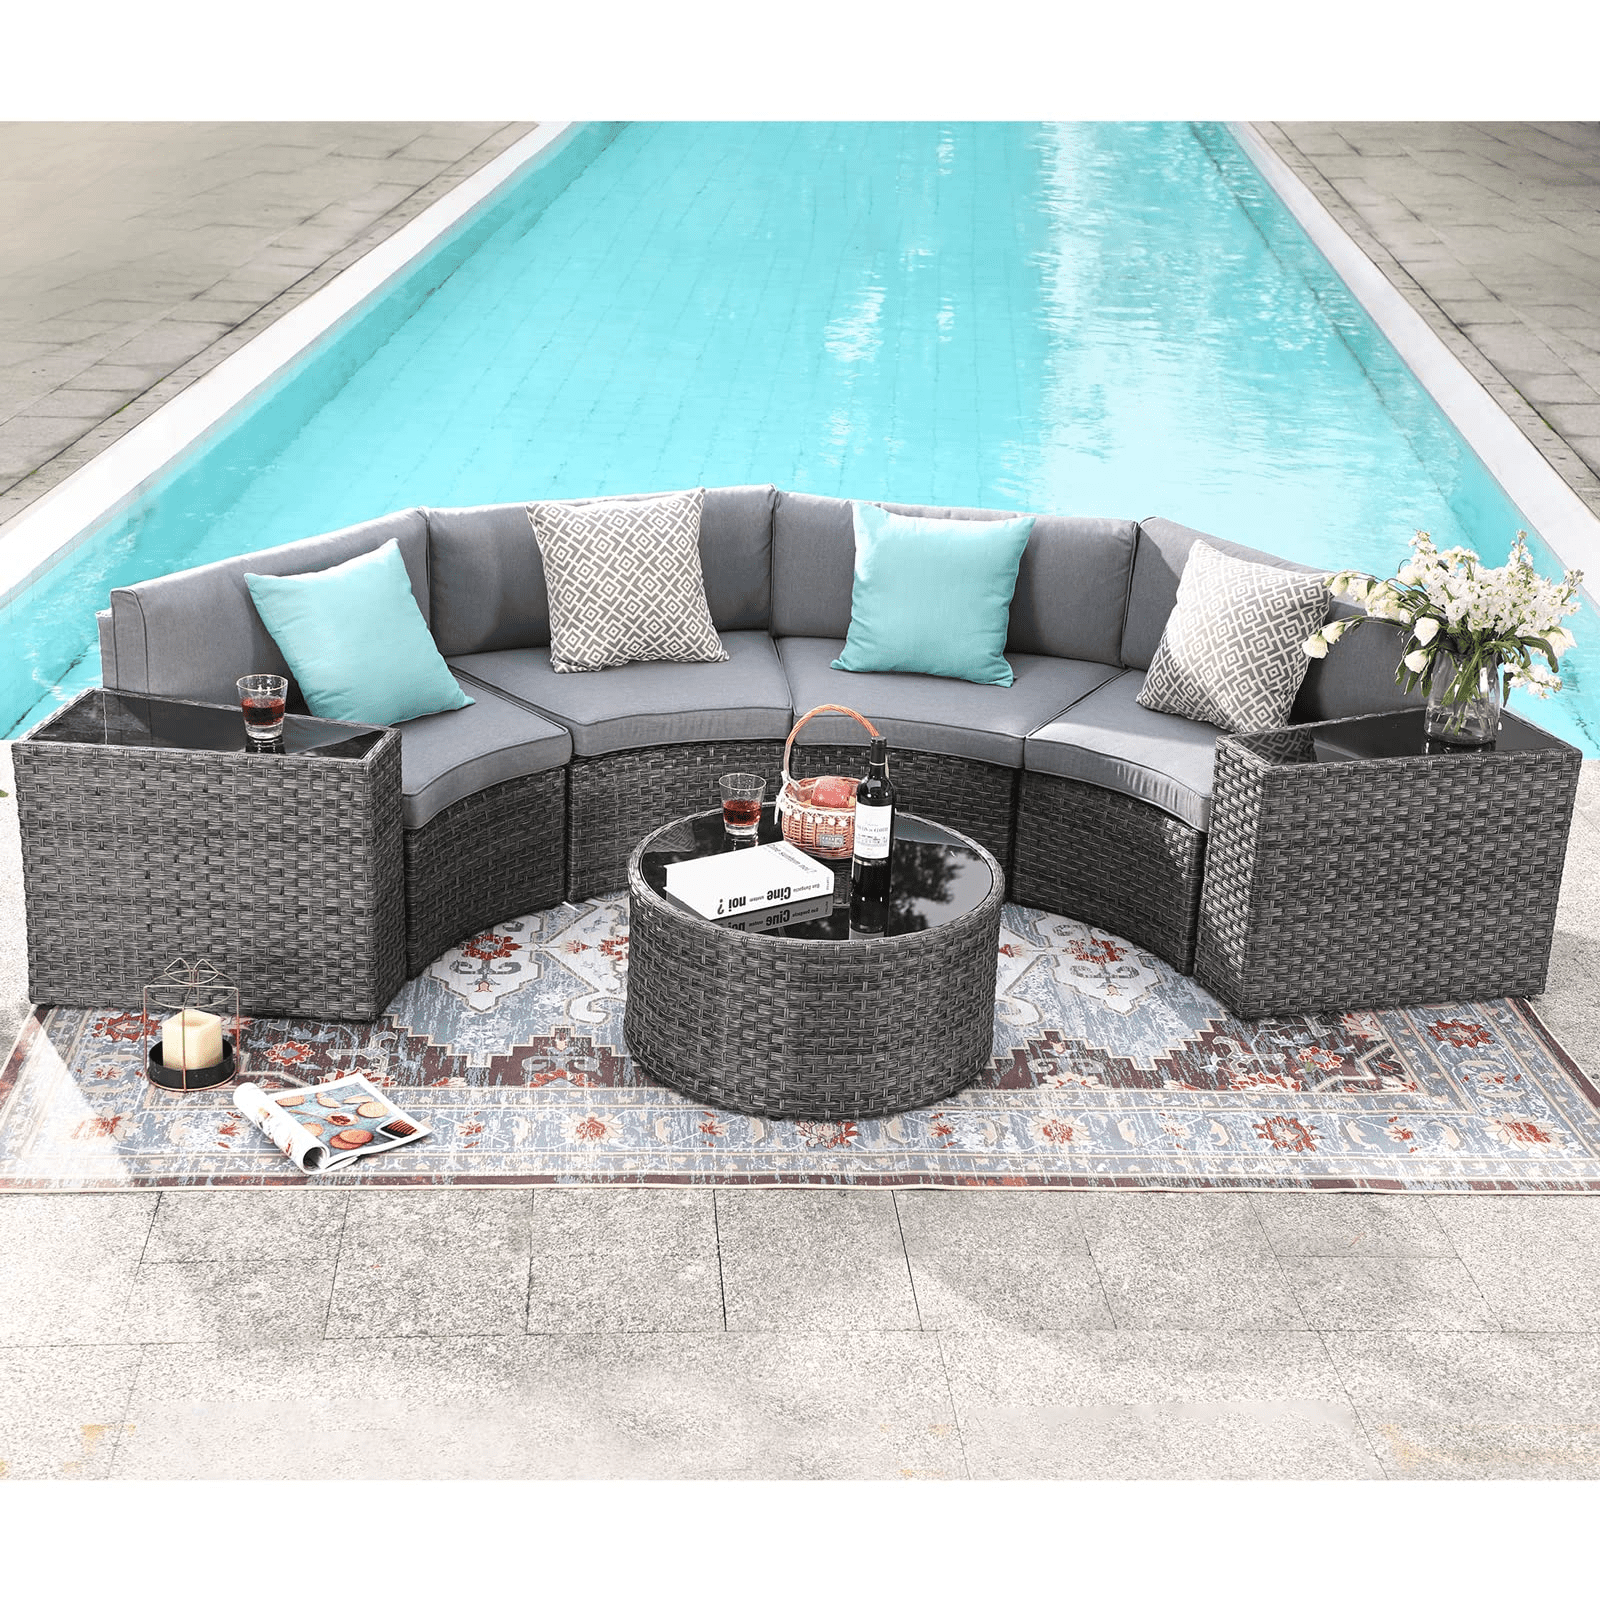 Outdoor Patio Furniture Set, Outdoor Sectional Half Moon Curved Sofa, Round  Coffee Table, 4 Pillows & Waterproof Cover, Taupe Cushion, 7 Piece –  Walmart Regarding Outdoor Half Round Coffee Tables (Photo 2 of 15)